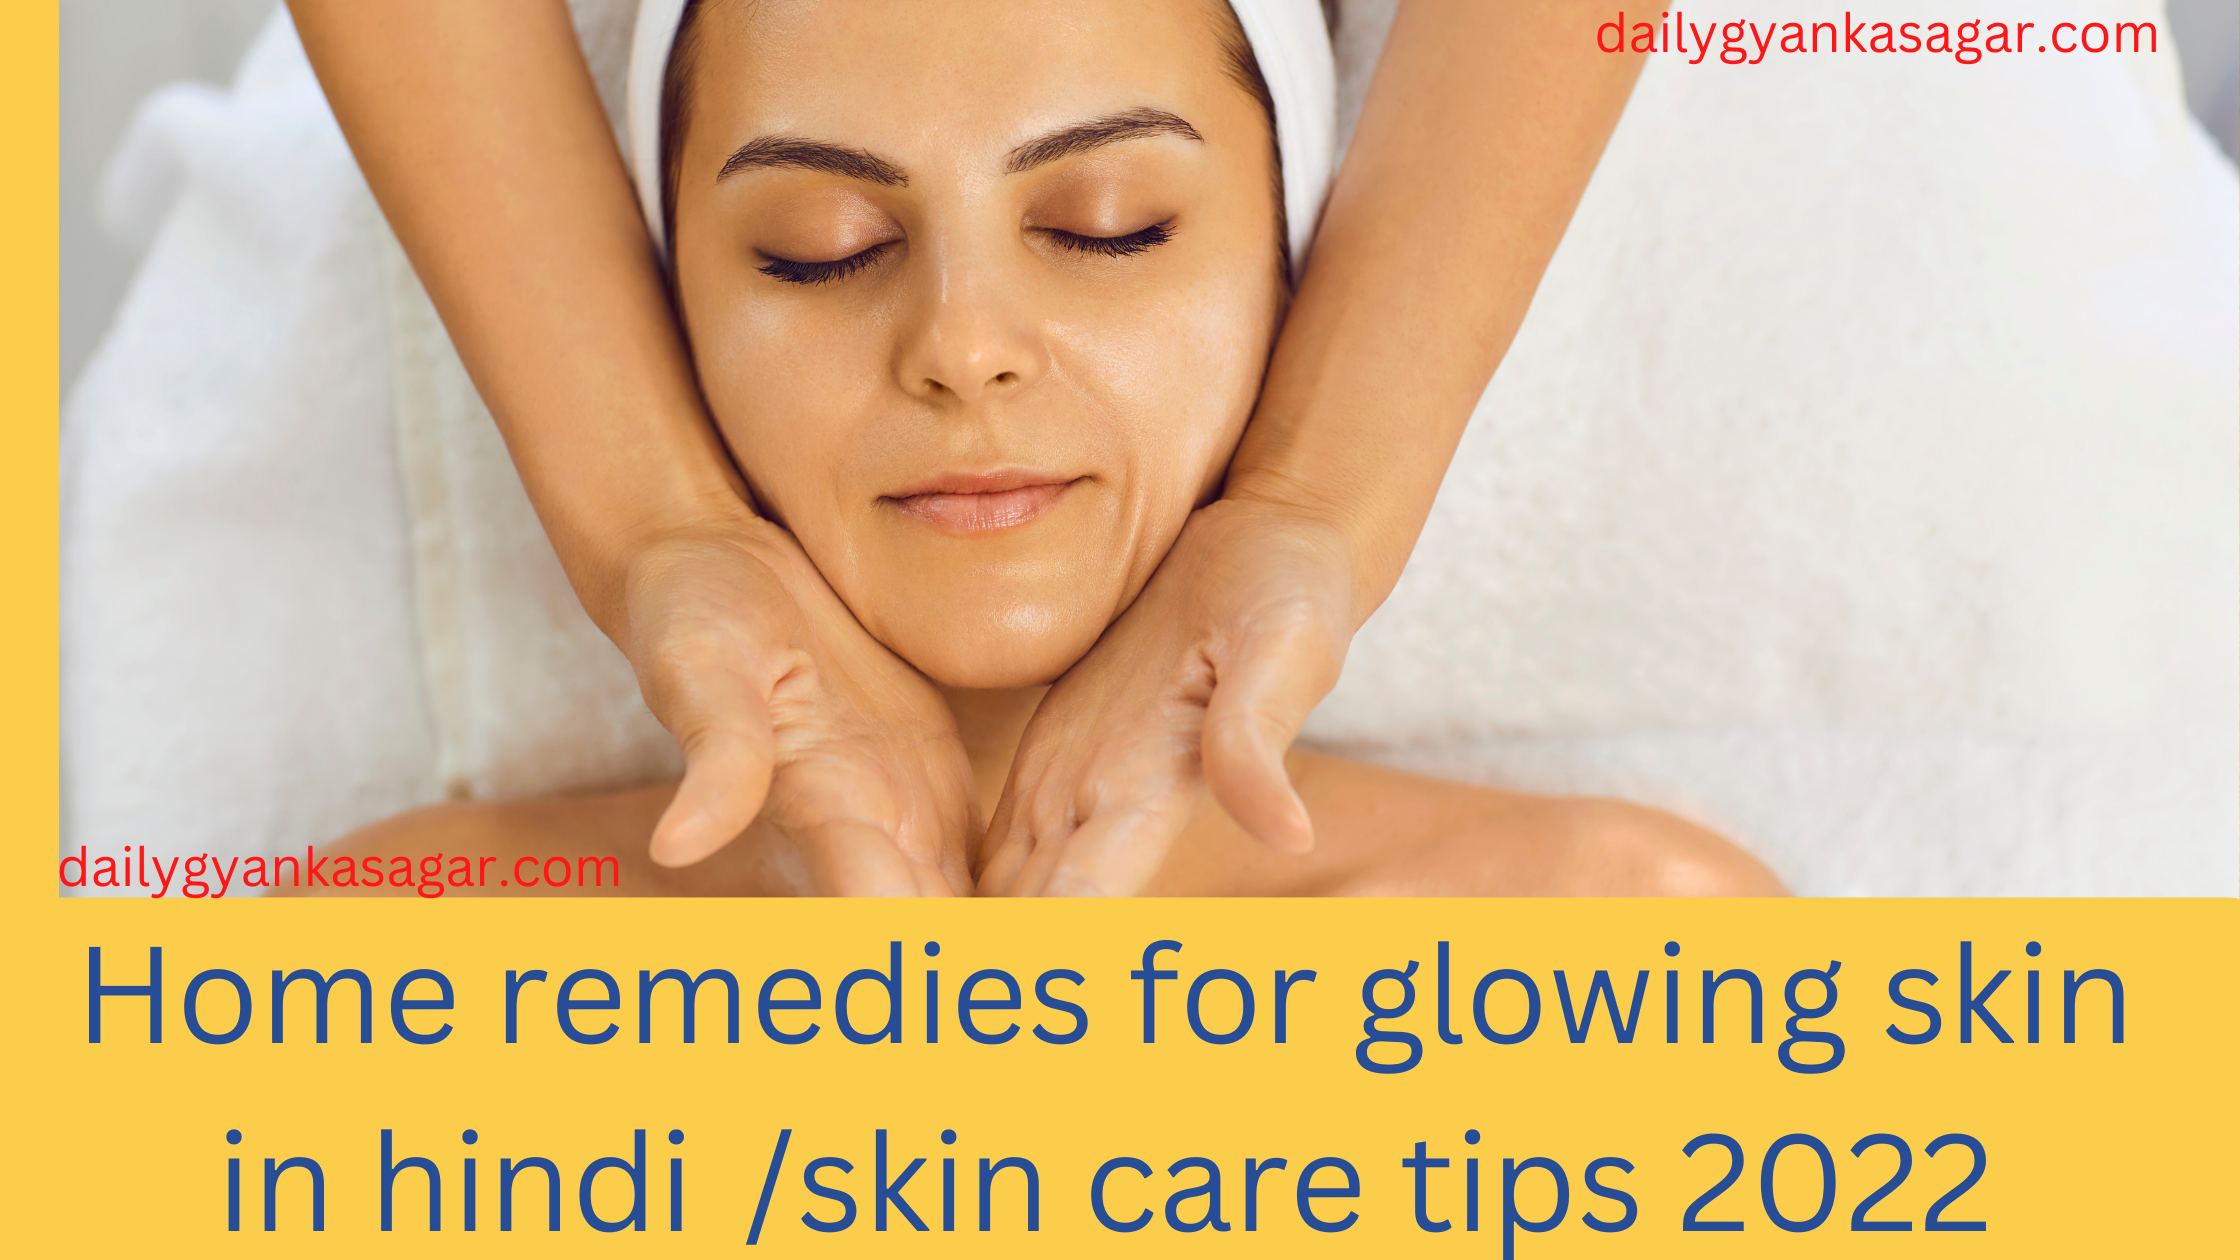 Home remedies for glowing skin in hindi /skin care tips 2022